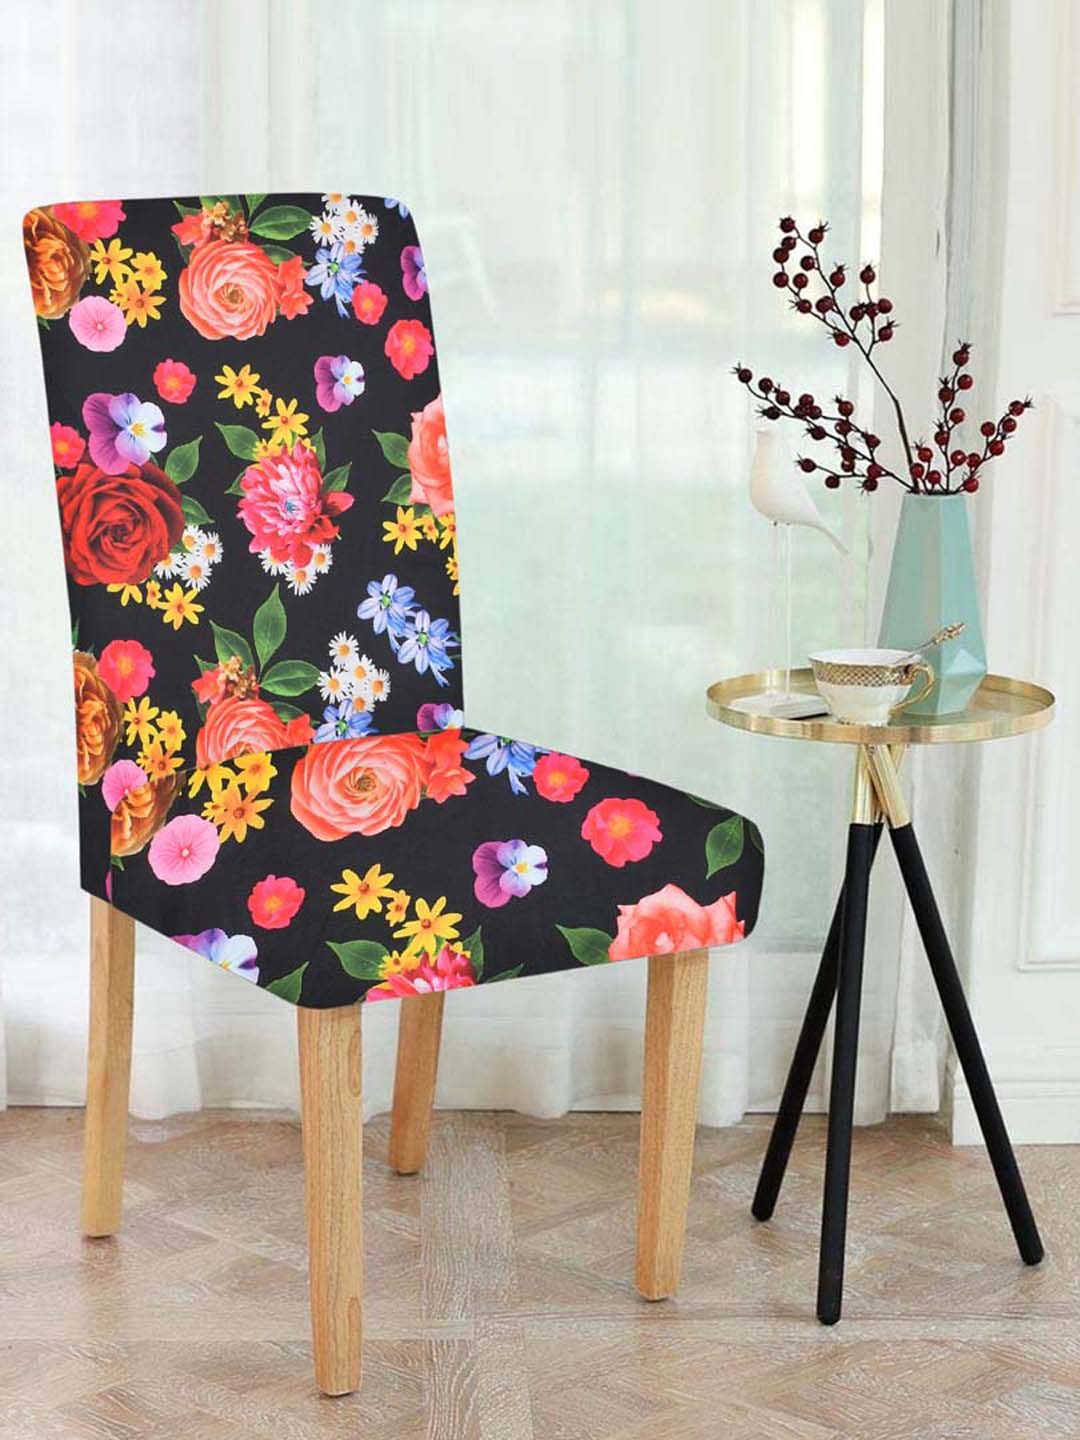 Slushy Mushy Pack of 4 Printed Chair Covers Price in India